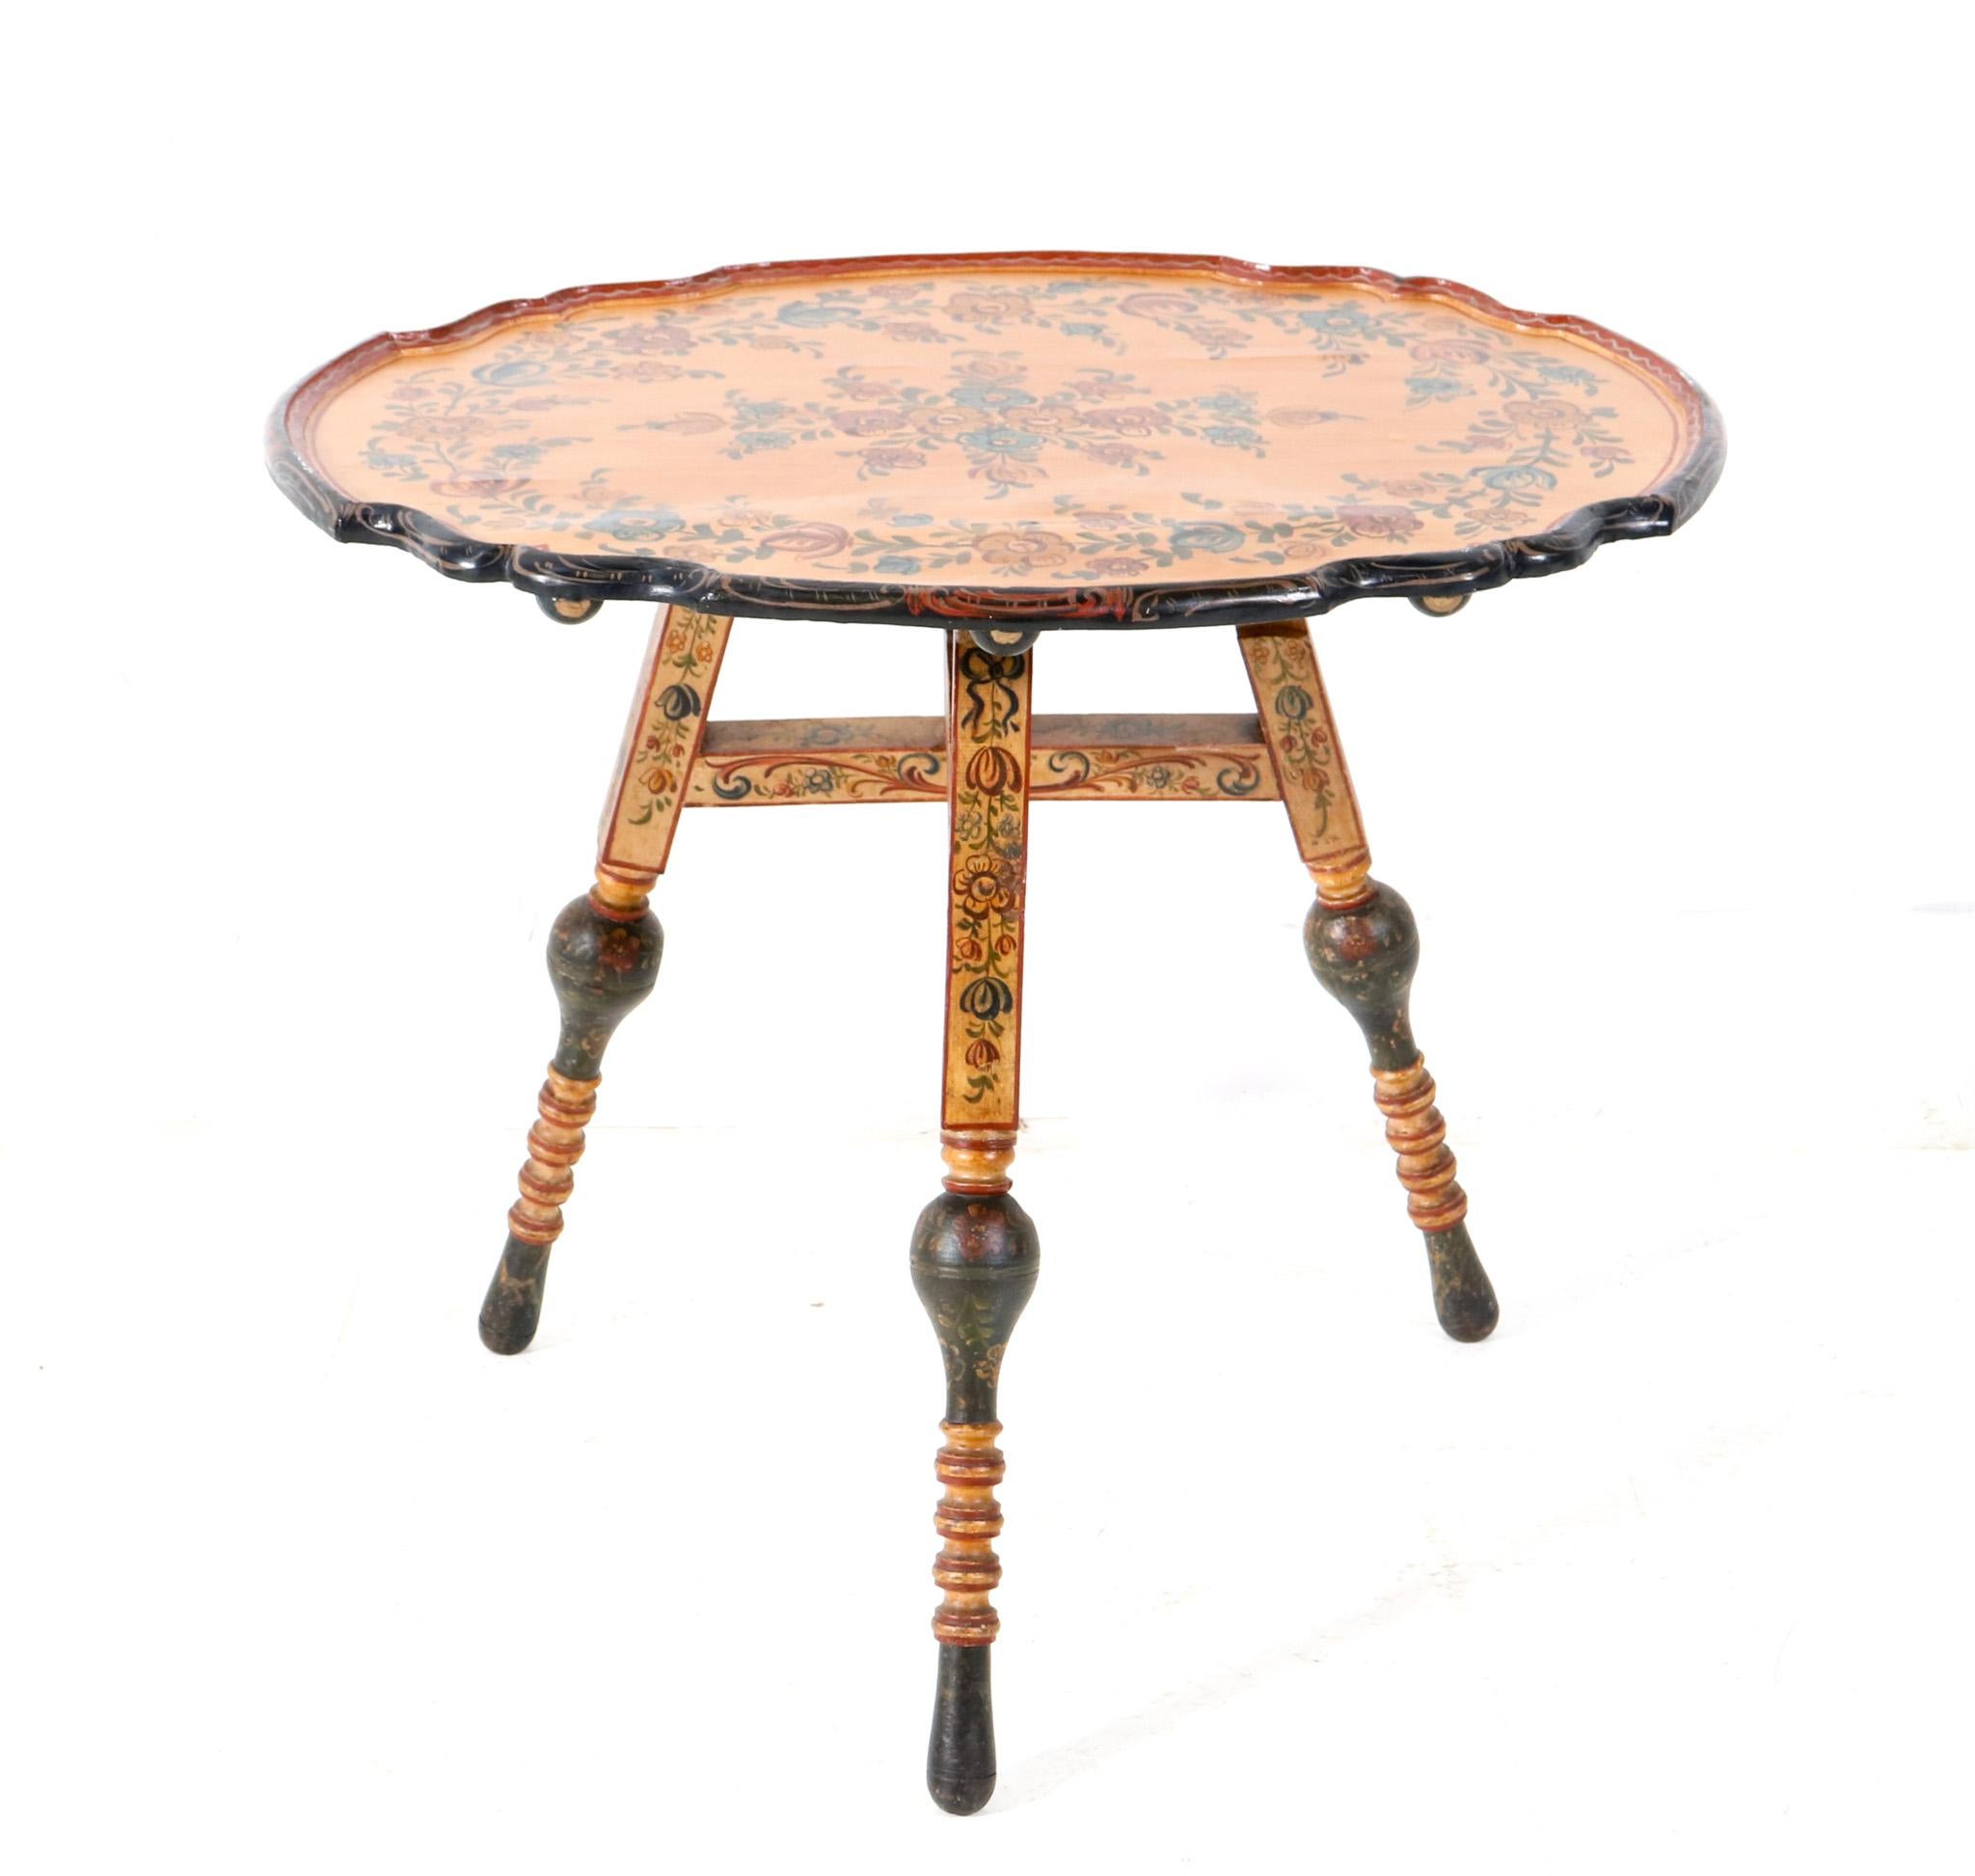 Magnificent and rare Folk Art Hindeloopen tilt top table.
Striking Dutch design from the 1900s.
Solid pine dished oval top, standing on a folding base with three turned splayed legs hand-painted with original polychrome paint in Hindeloopen